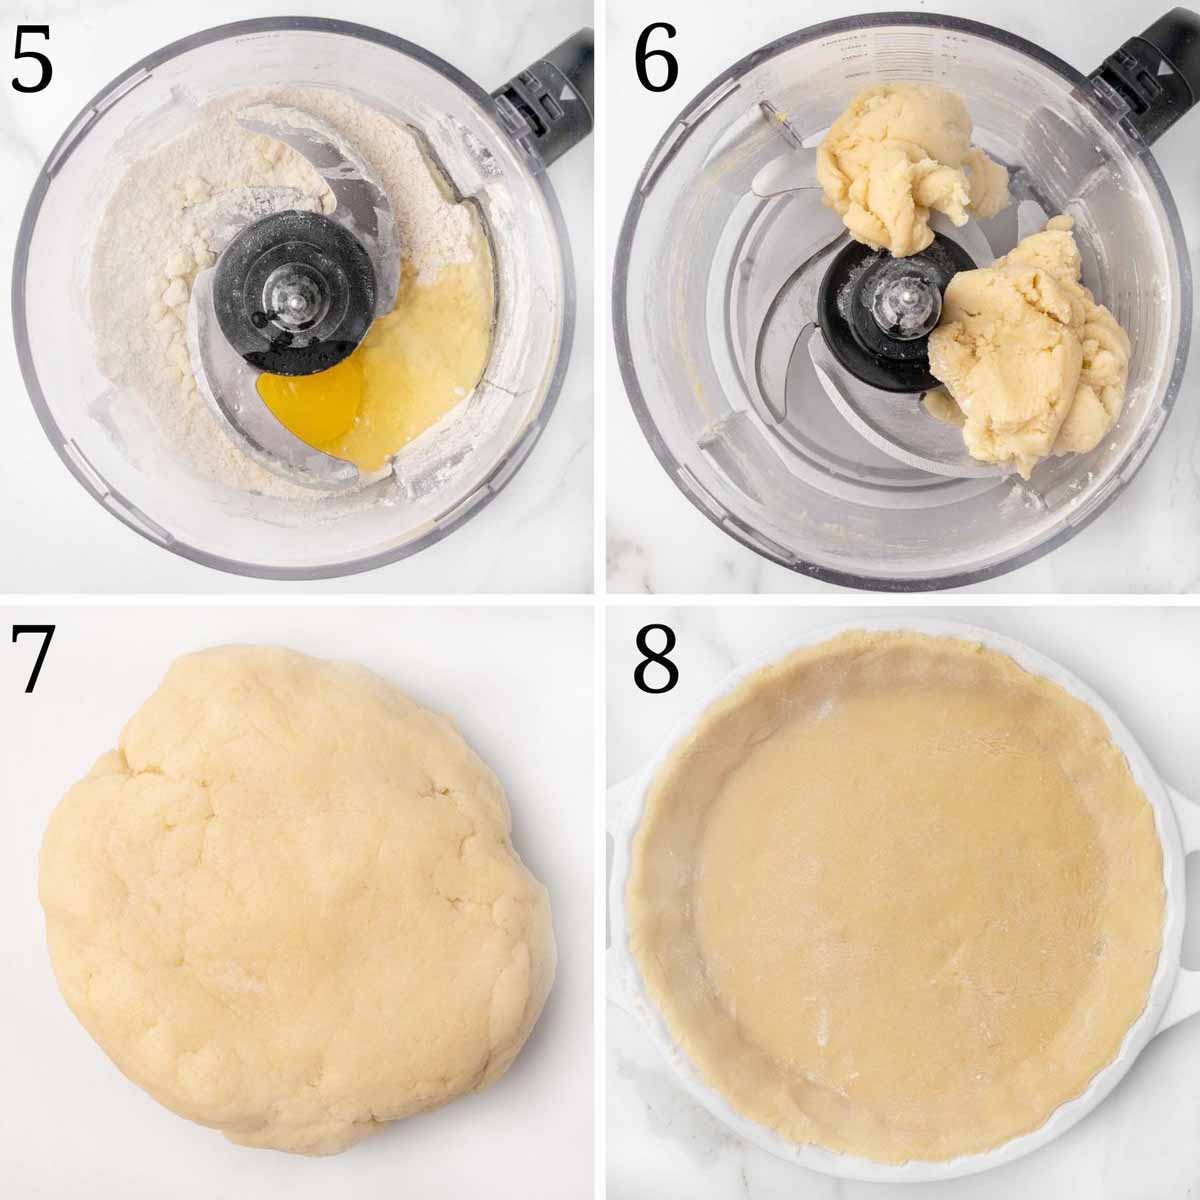 four images showing how to finish making the pie crust and placing it in the pie pan